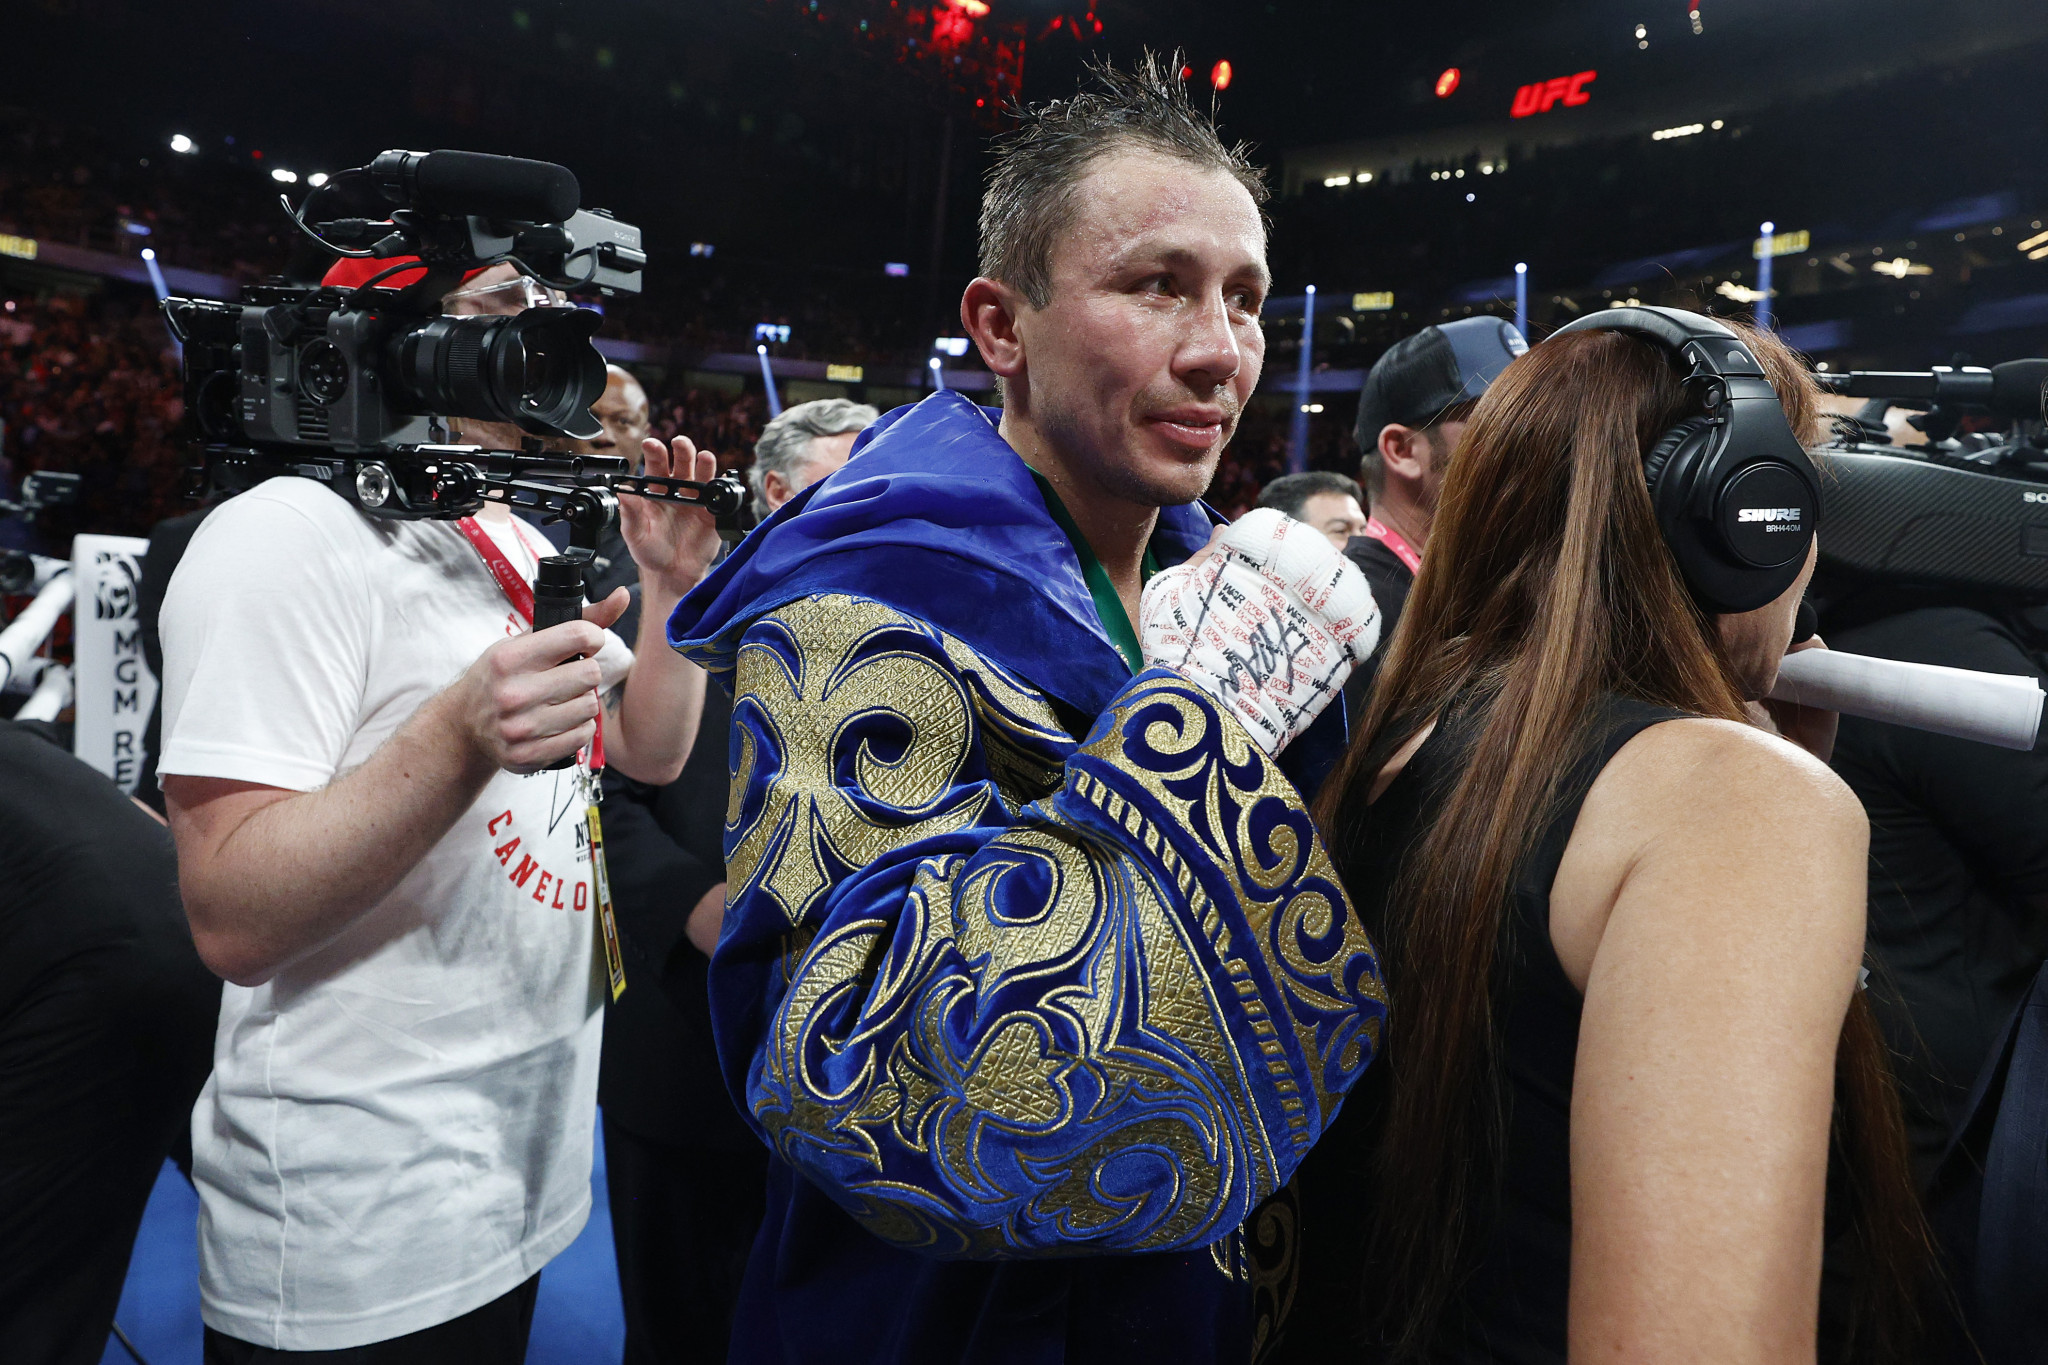 'GGG' was considered by many the best pound-for-pound boxer in the world. GETTY IMAGES